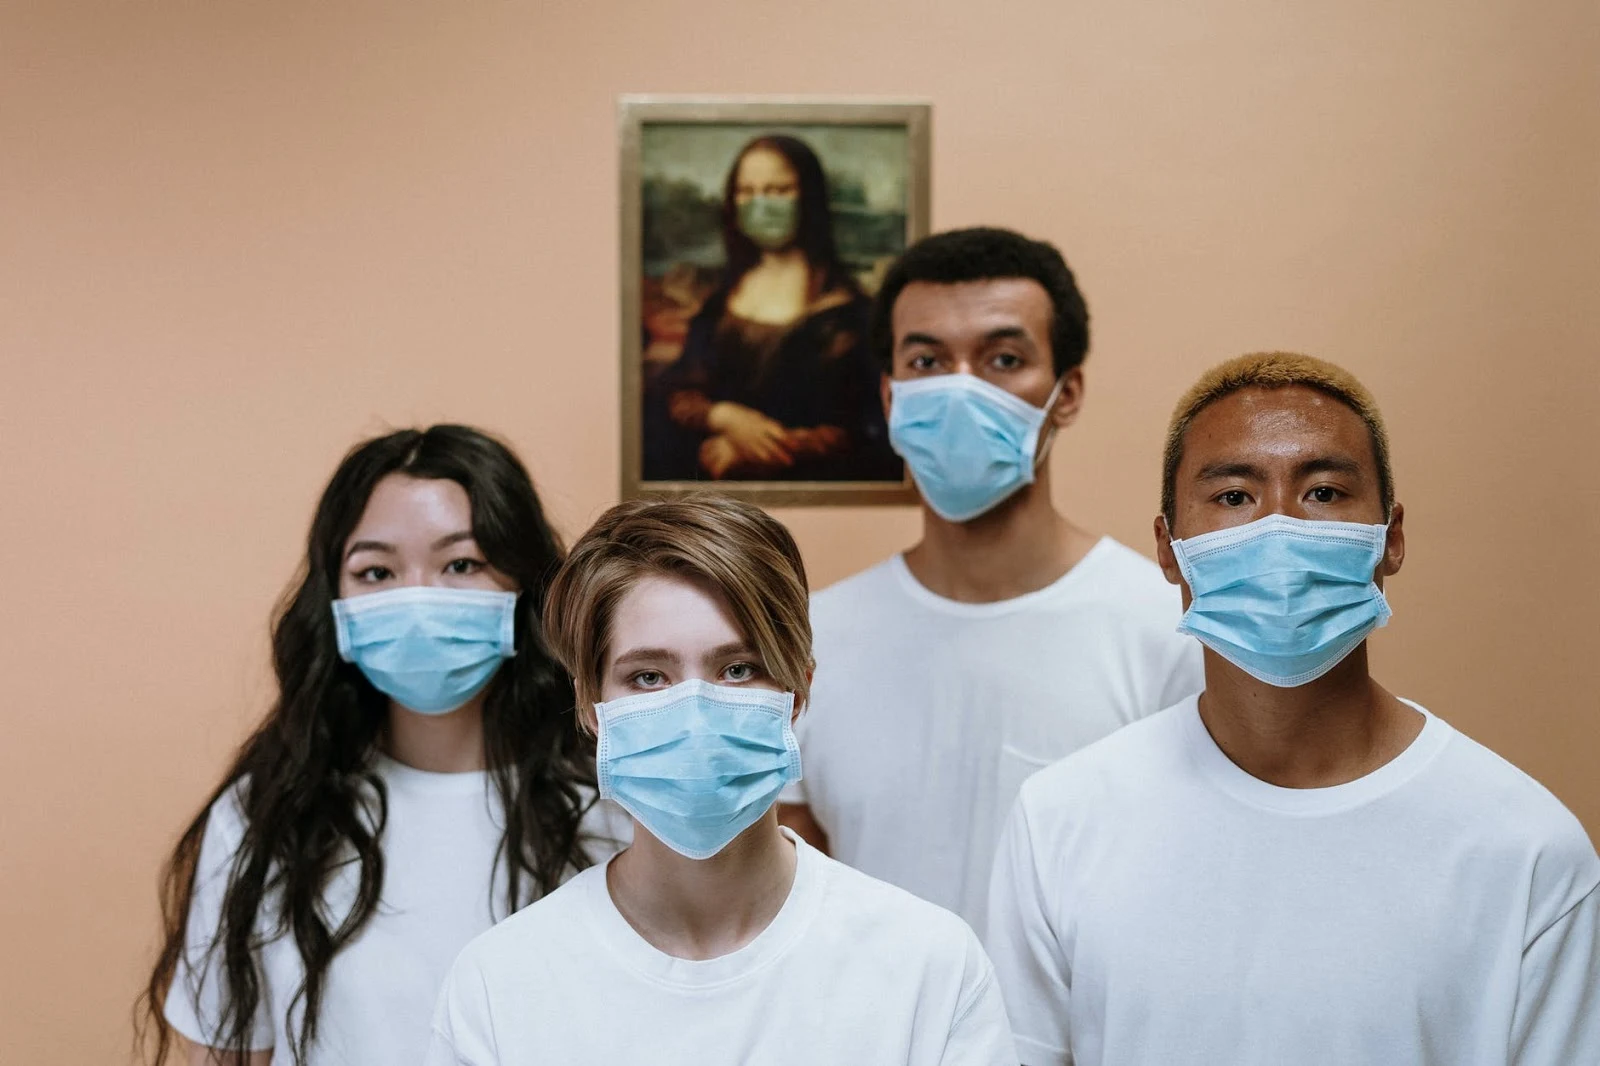 The Actual Dos and Don’ts of Wearing a Medical Mask